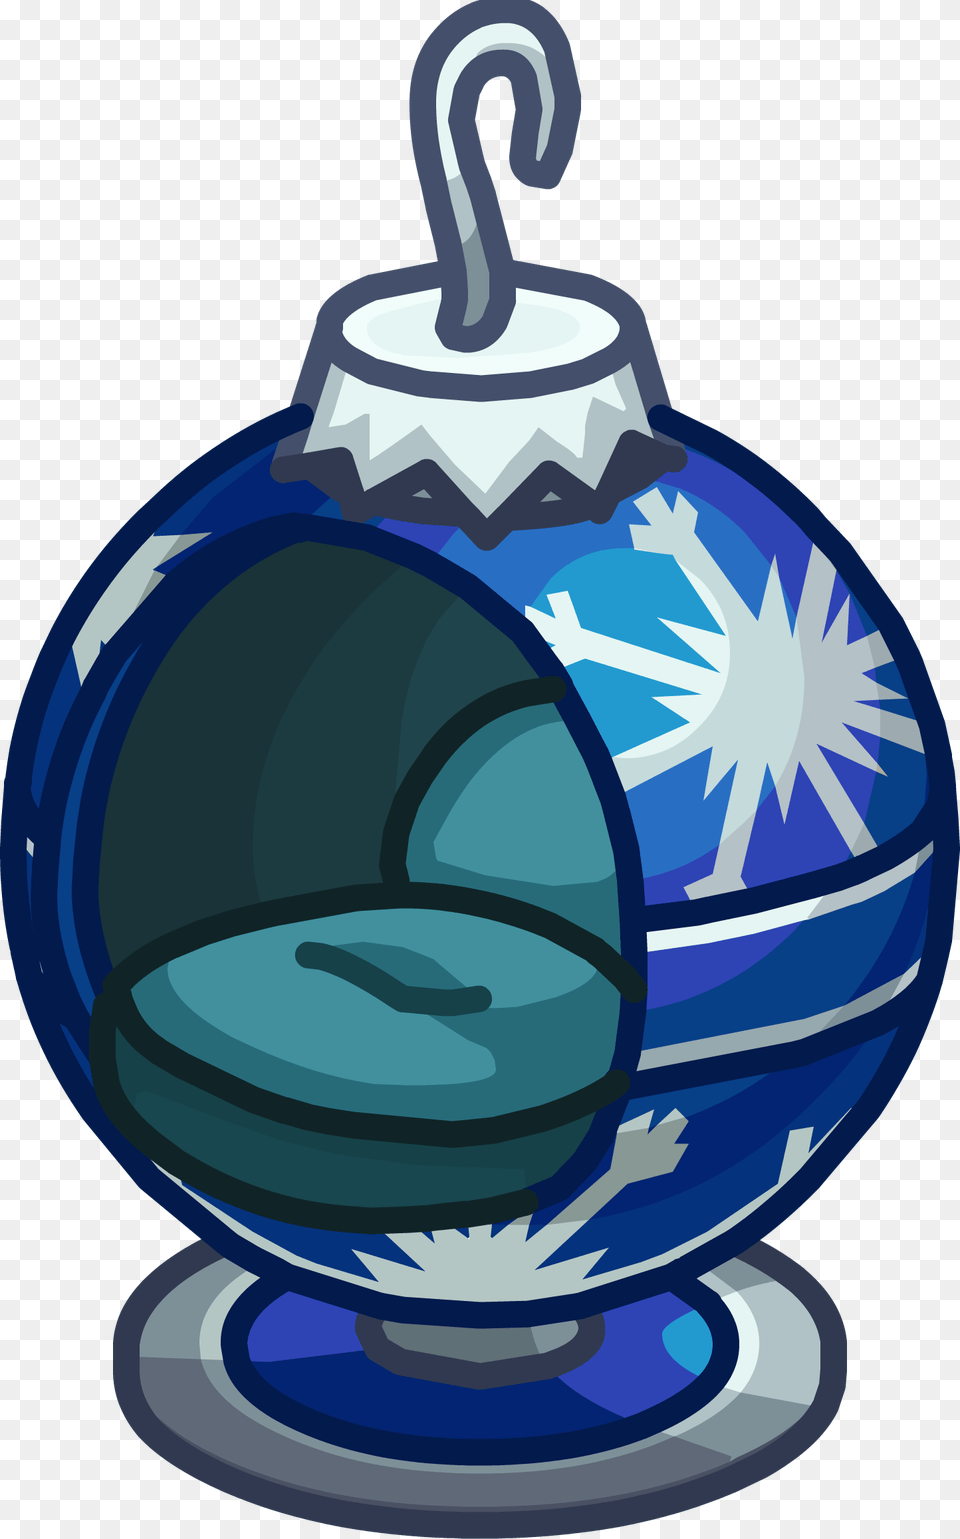 Blue Ornament Chair Club Penguin Ids Chairs, Pottery, Ammunition, Grenade, Weapon Free Png